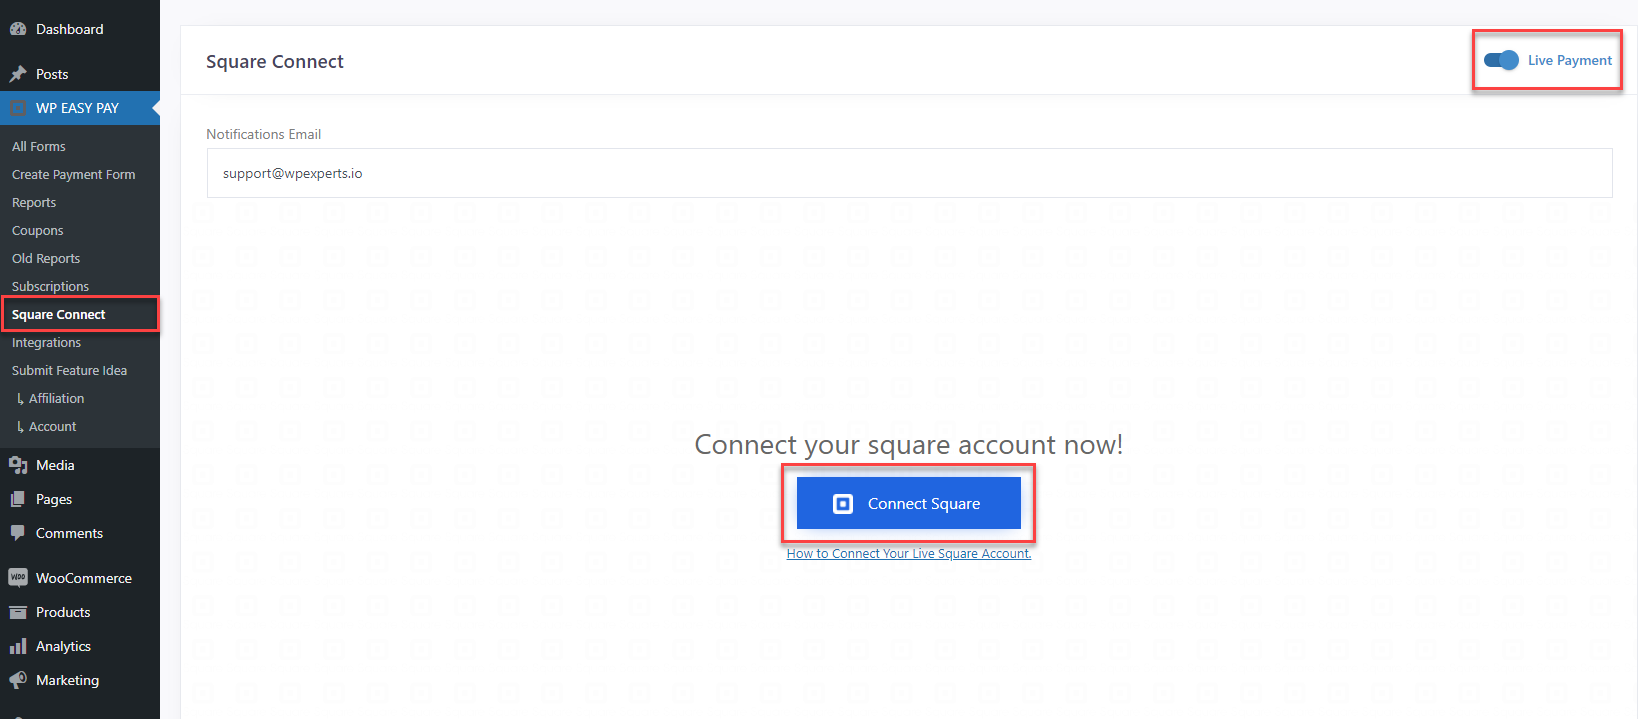 Connect your Square Account